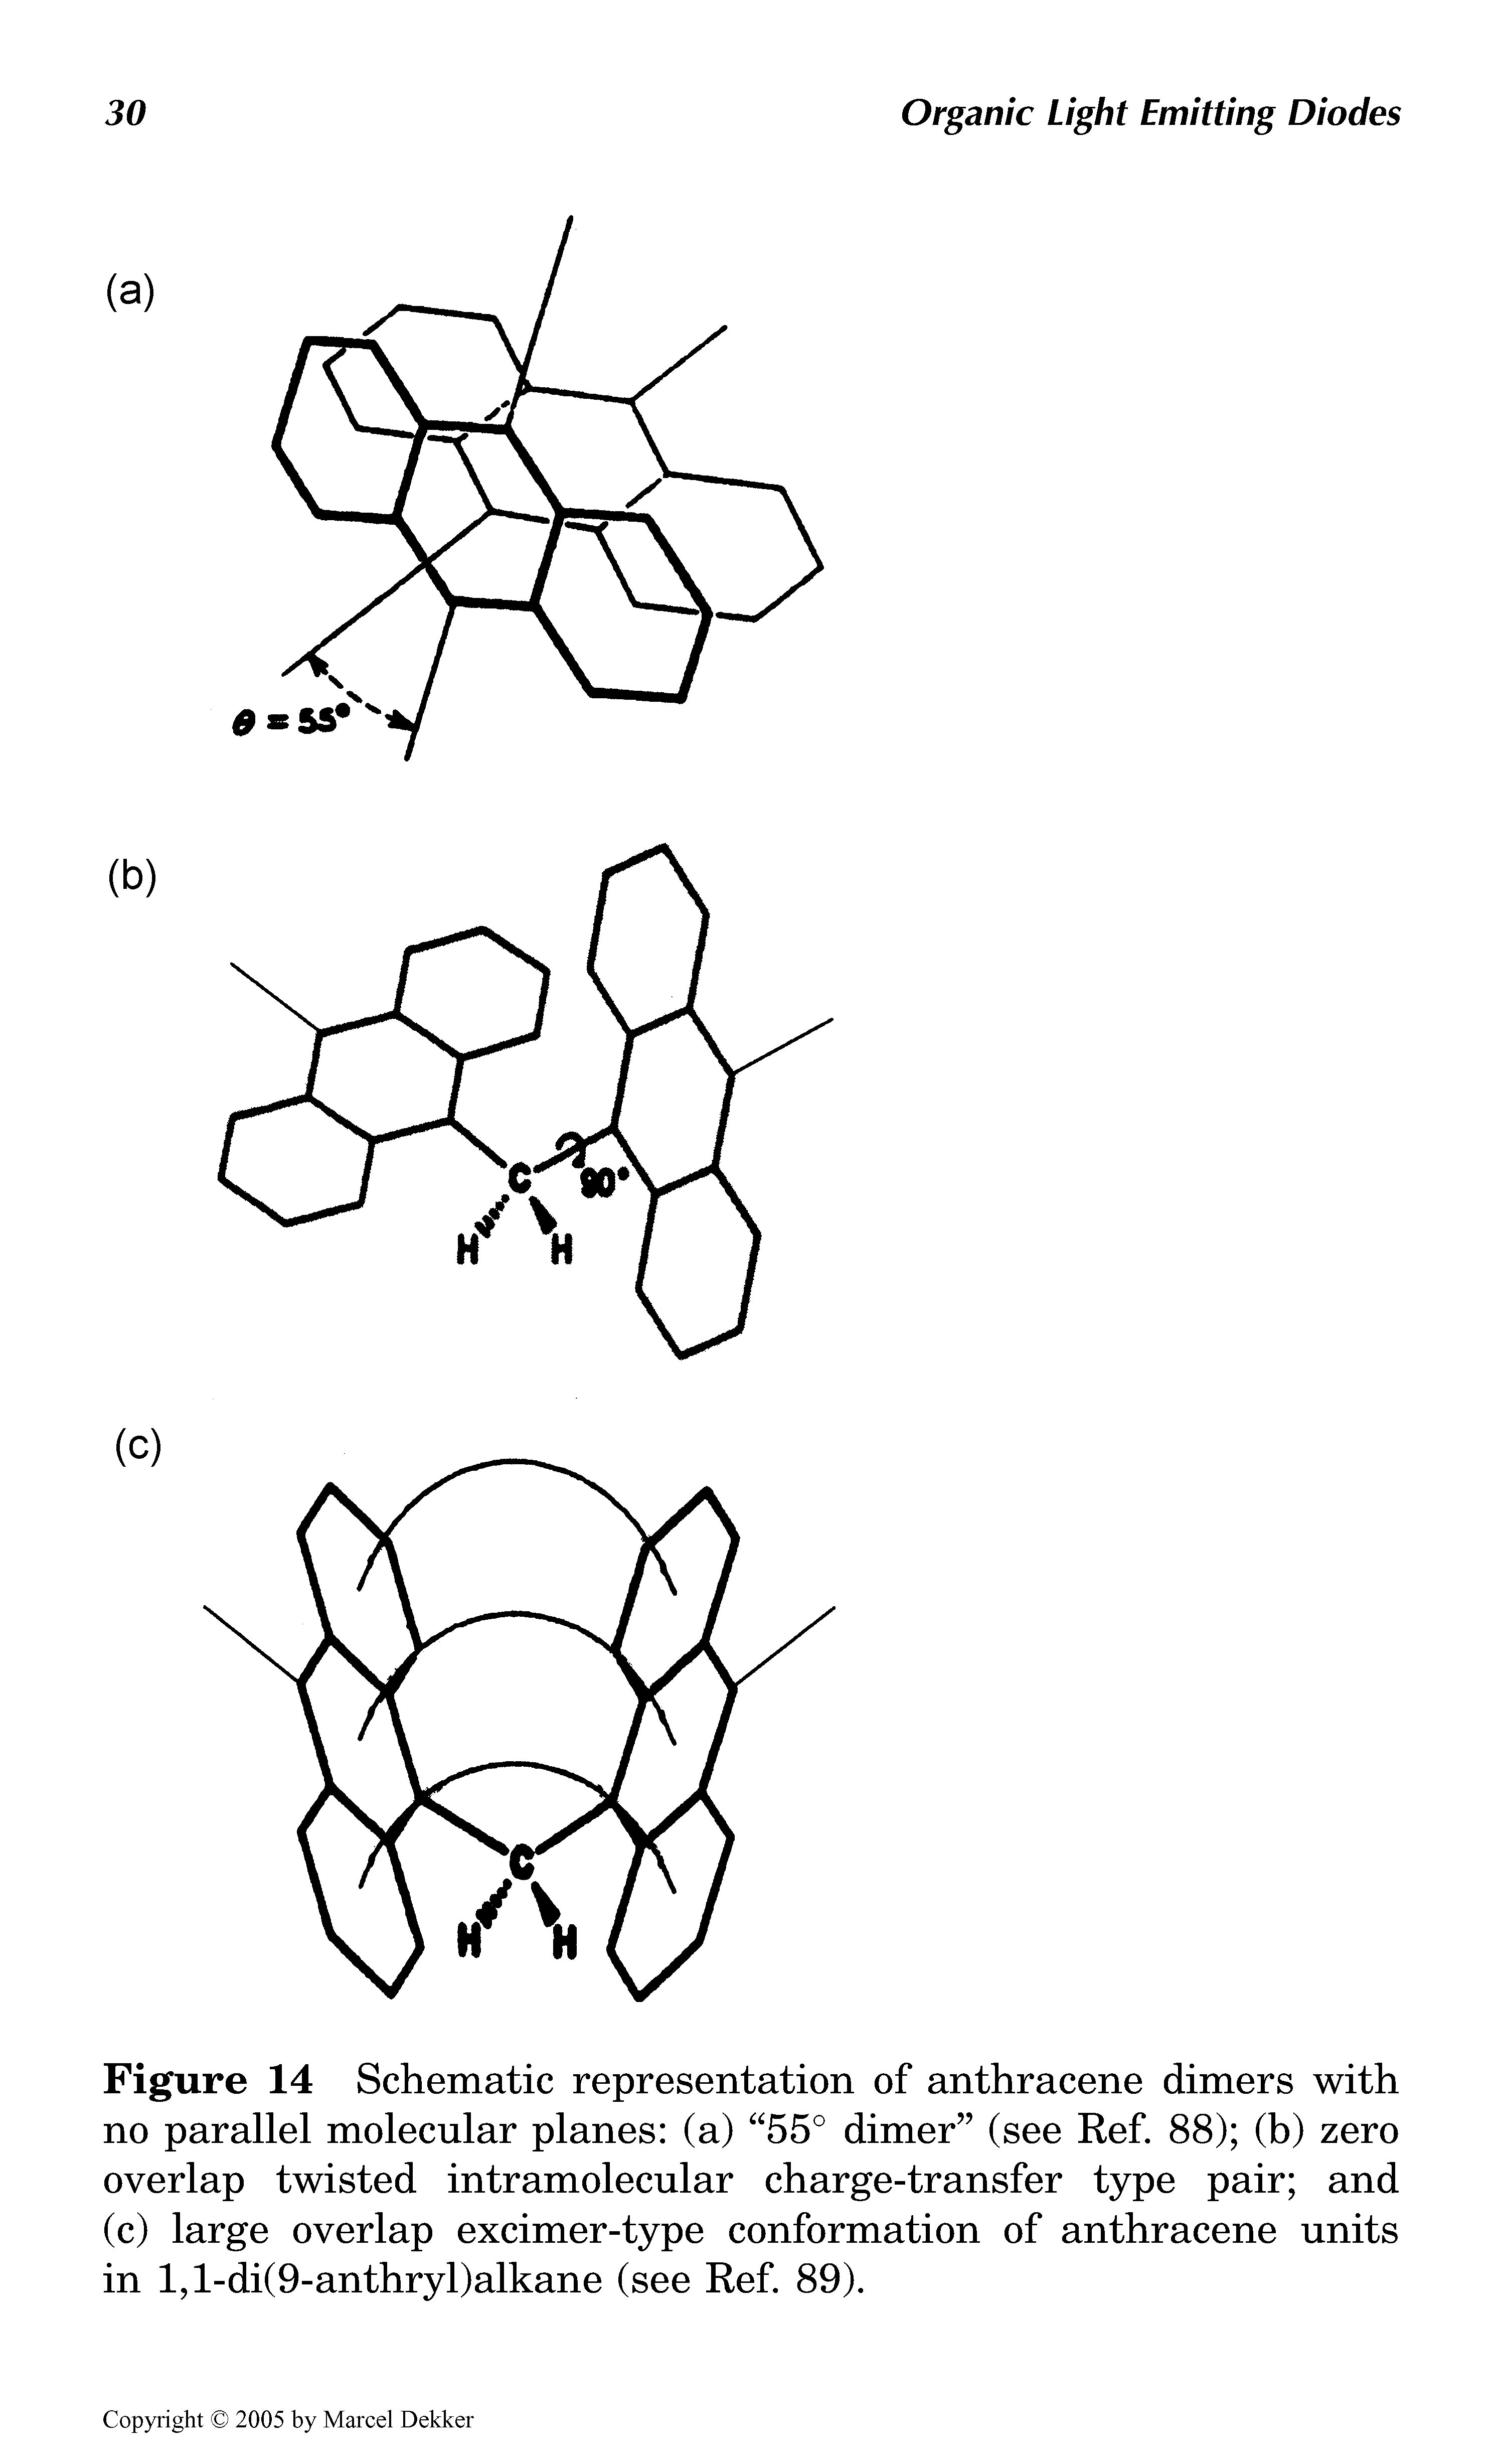 Figure 14 Schematic representation of anthracene dimers with no parallel molecular planes (a) 55° dimer (see Ref. 88) (b) zero overlap twisted intramolecular charge-transfer type pair and (c) large overlap excimer-type conformation of anthracene units in l,l-di(9-anthryl)alkane (see Ref. 89).